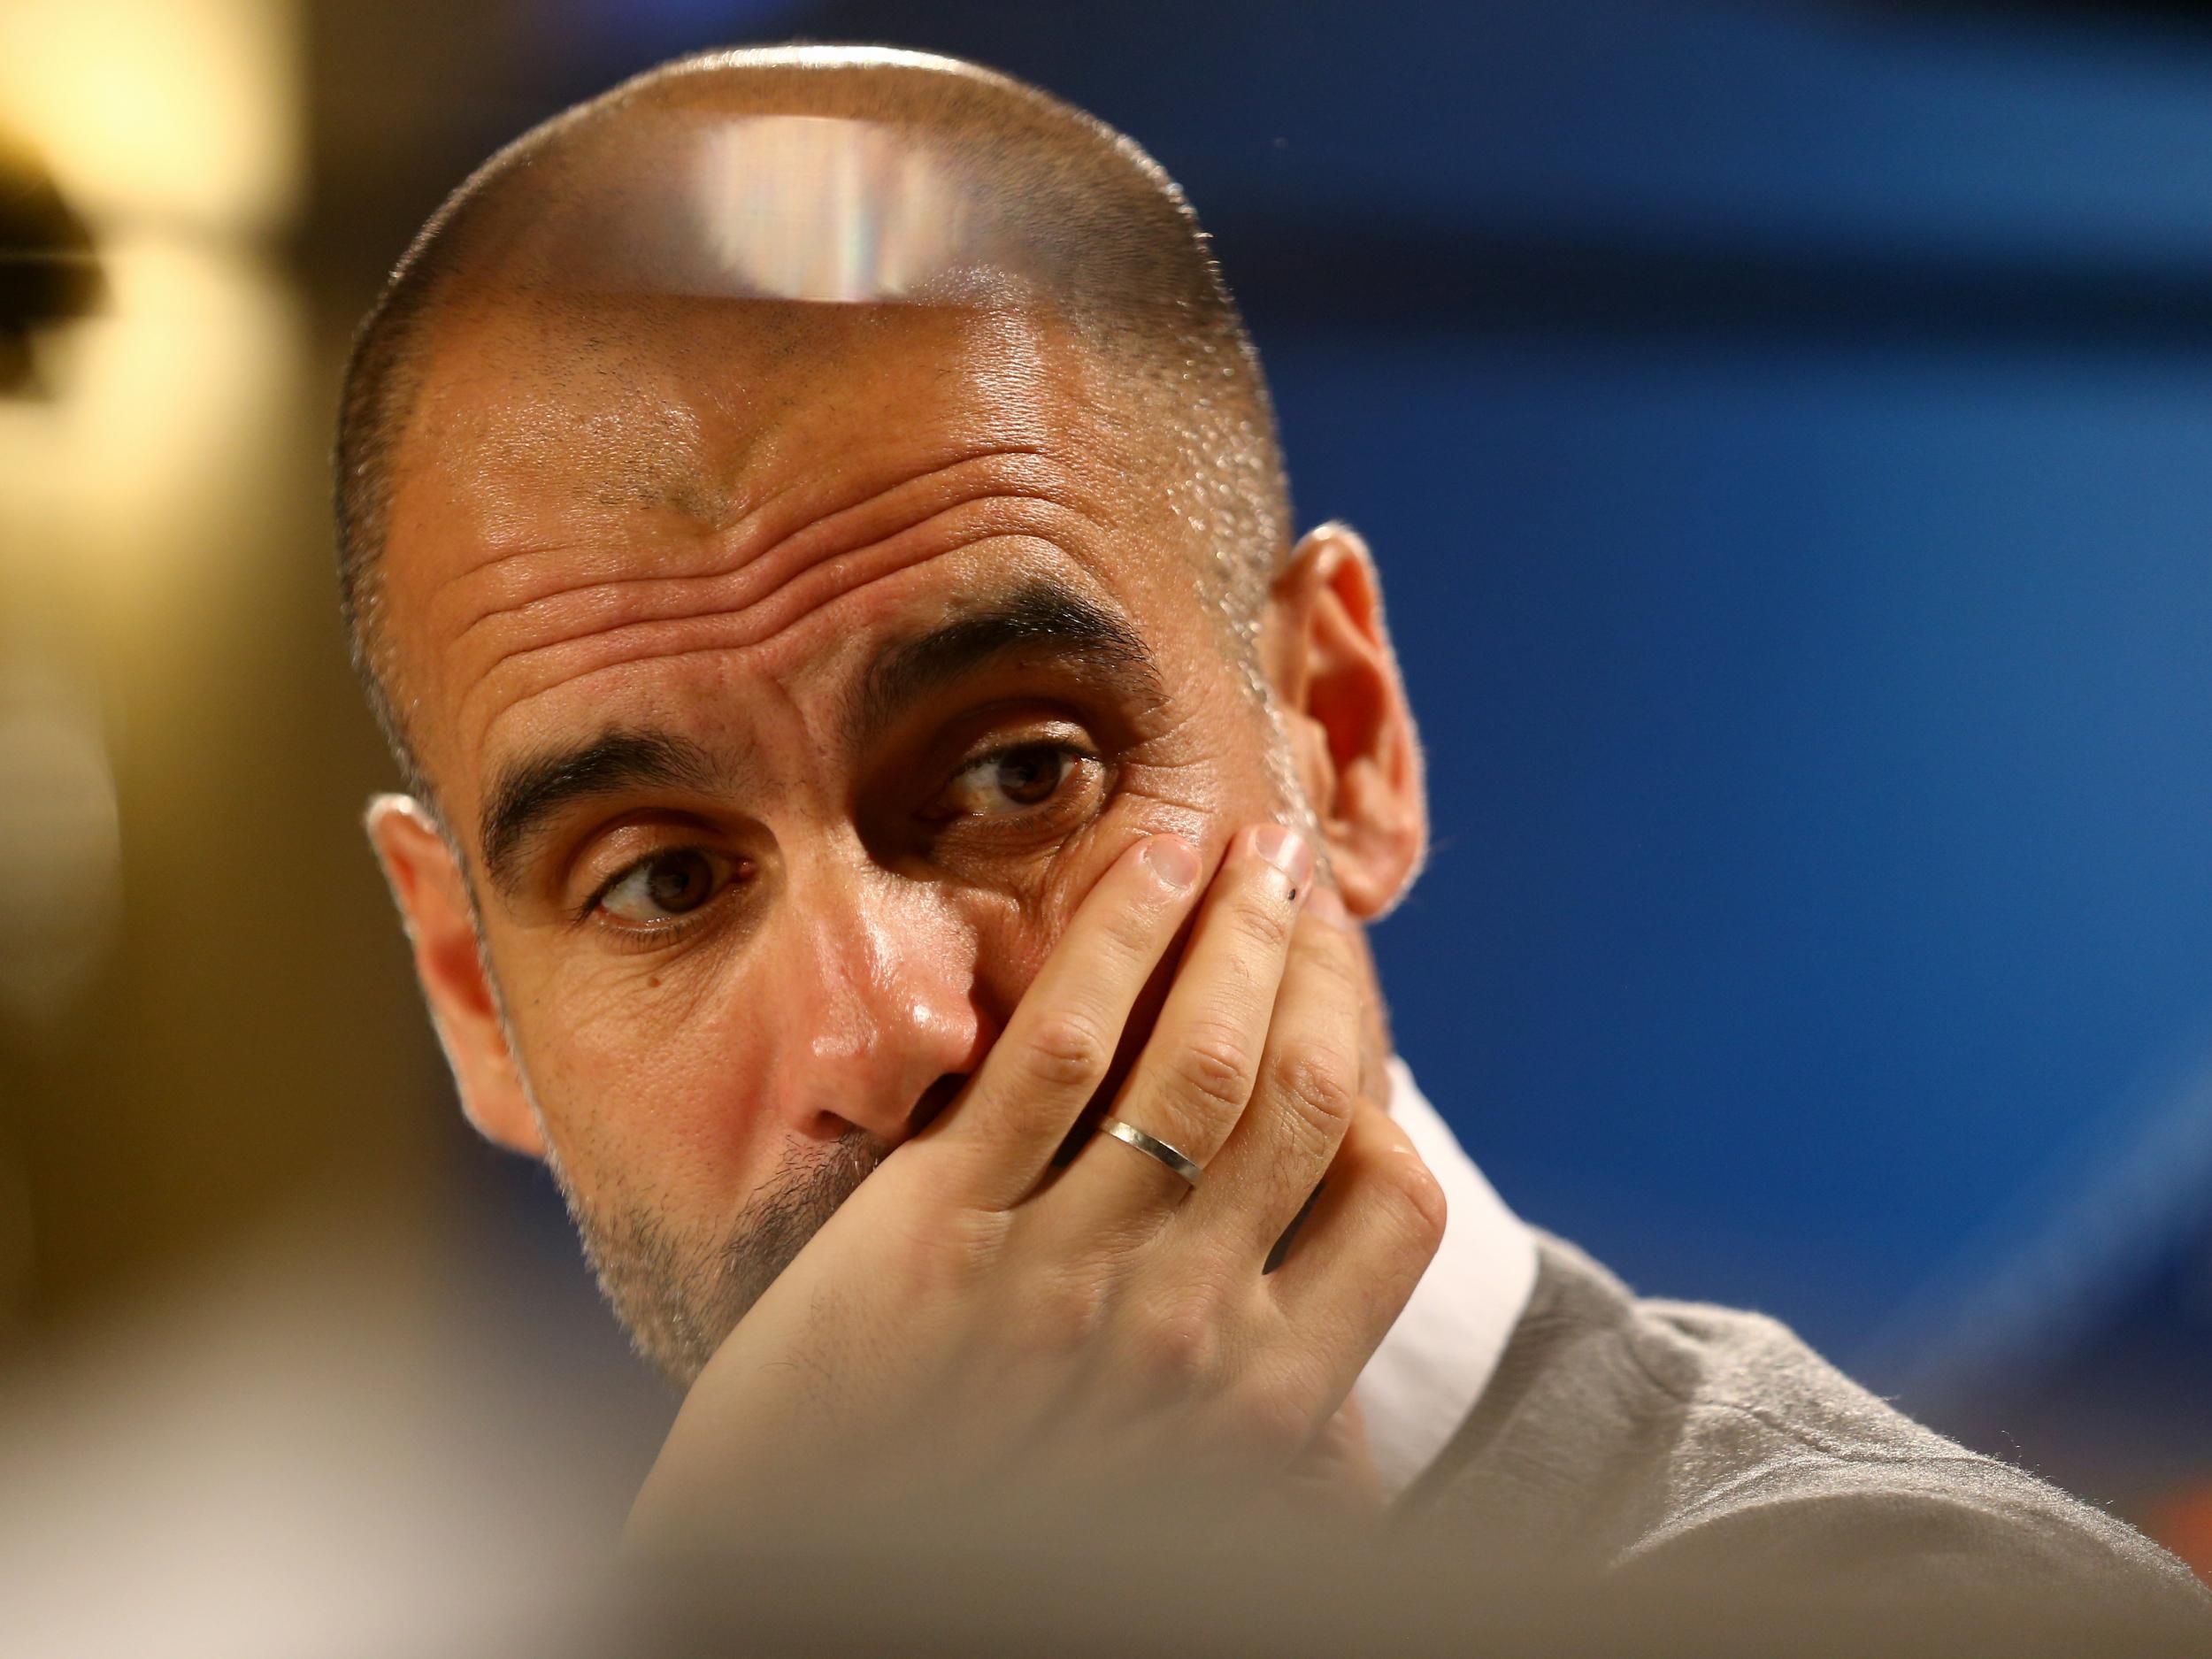 Guardiola has admitted results have not been good enough this season